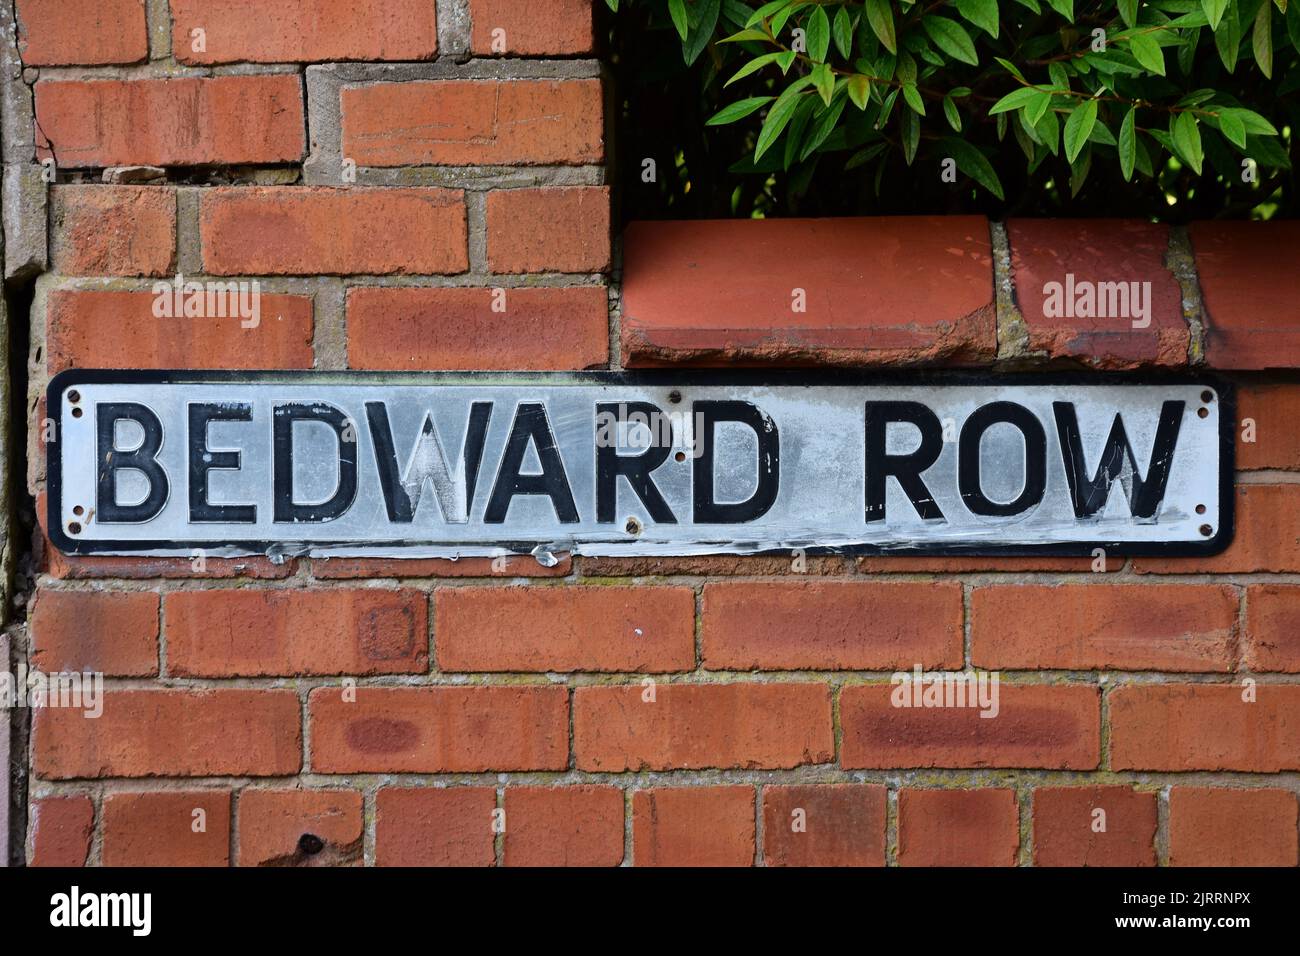 A faded street name sign for Bedward Row mounted on a red brick wall Stock Photo